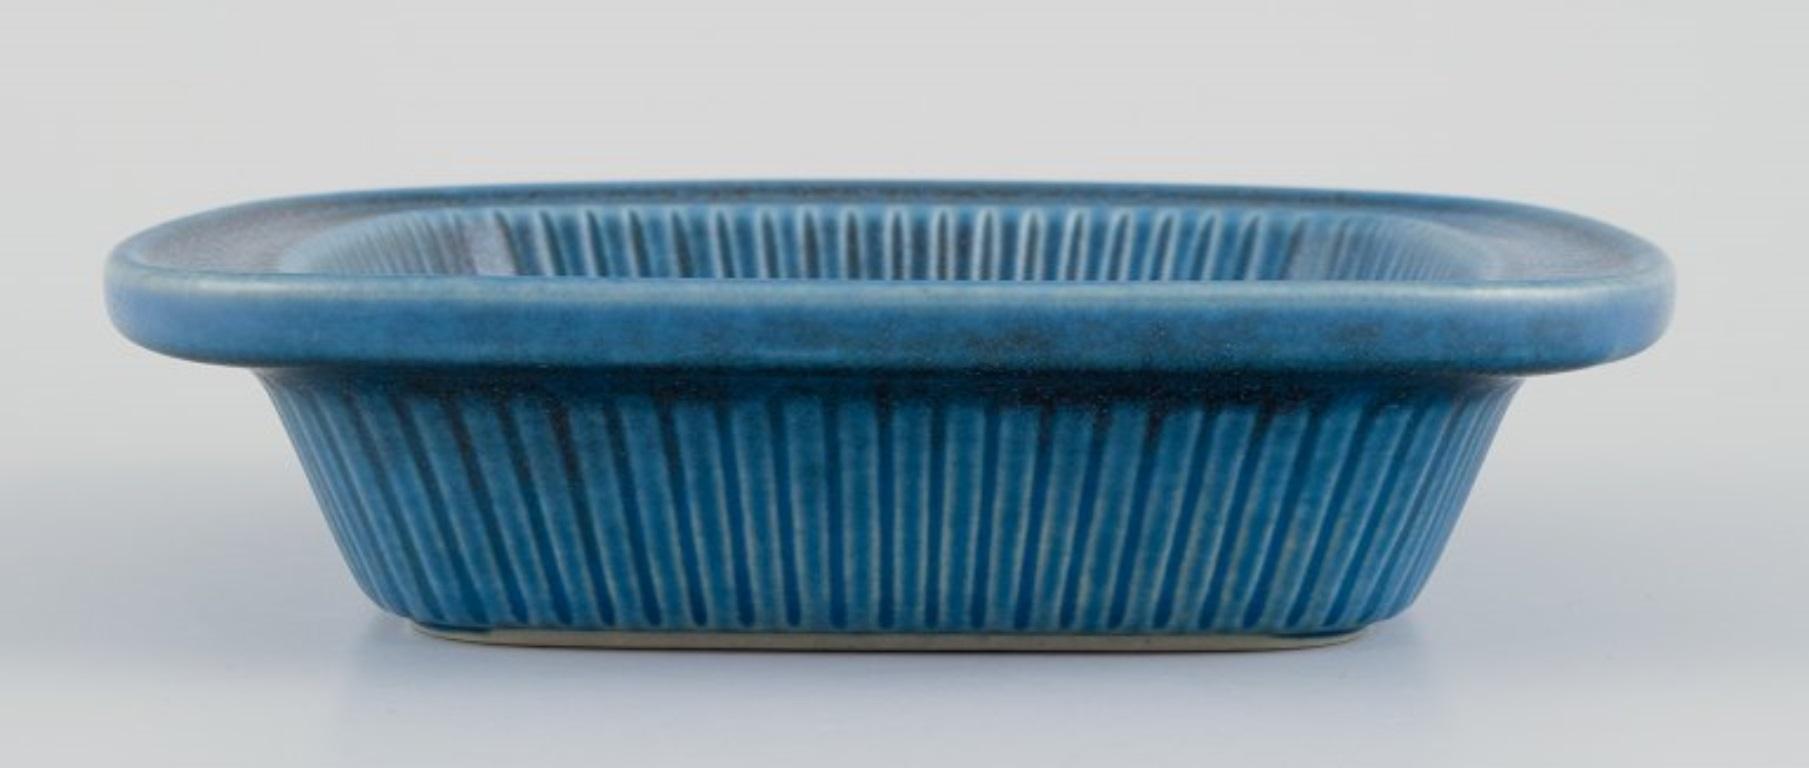 Gunnar Nylund for Rörstrand, Sweden. Low bowl with blue-toned glaze  In Excellent Condition For Sale In Copenhagen, DK